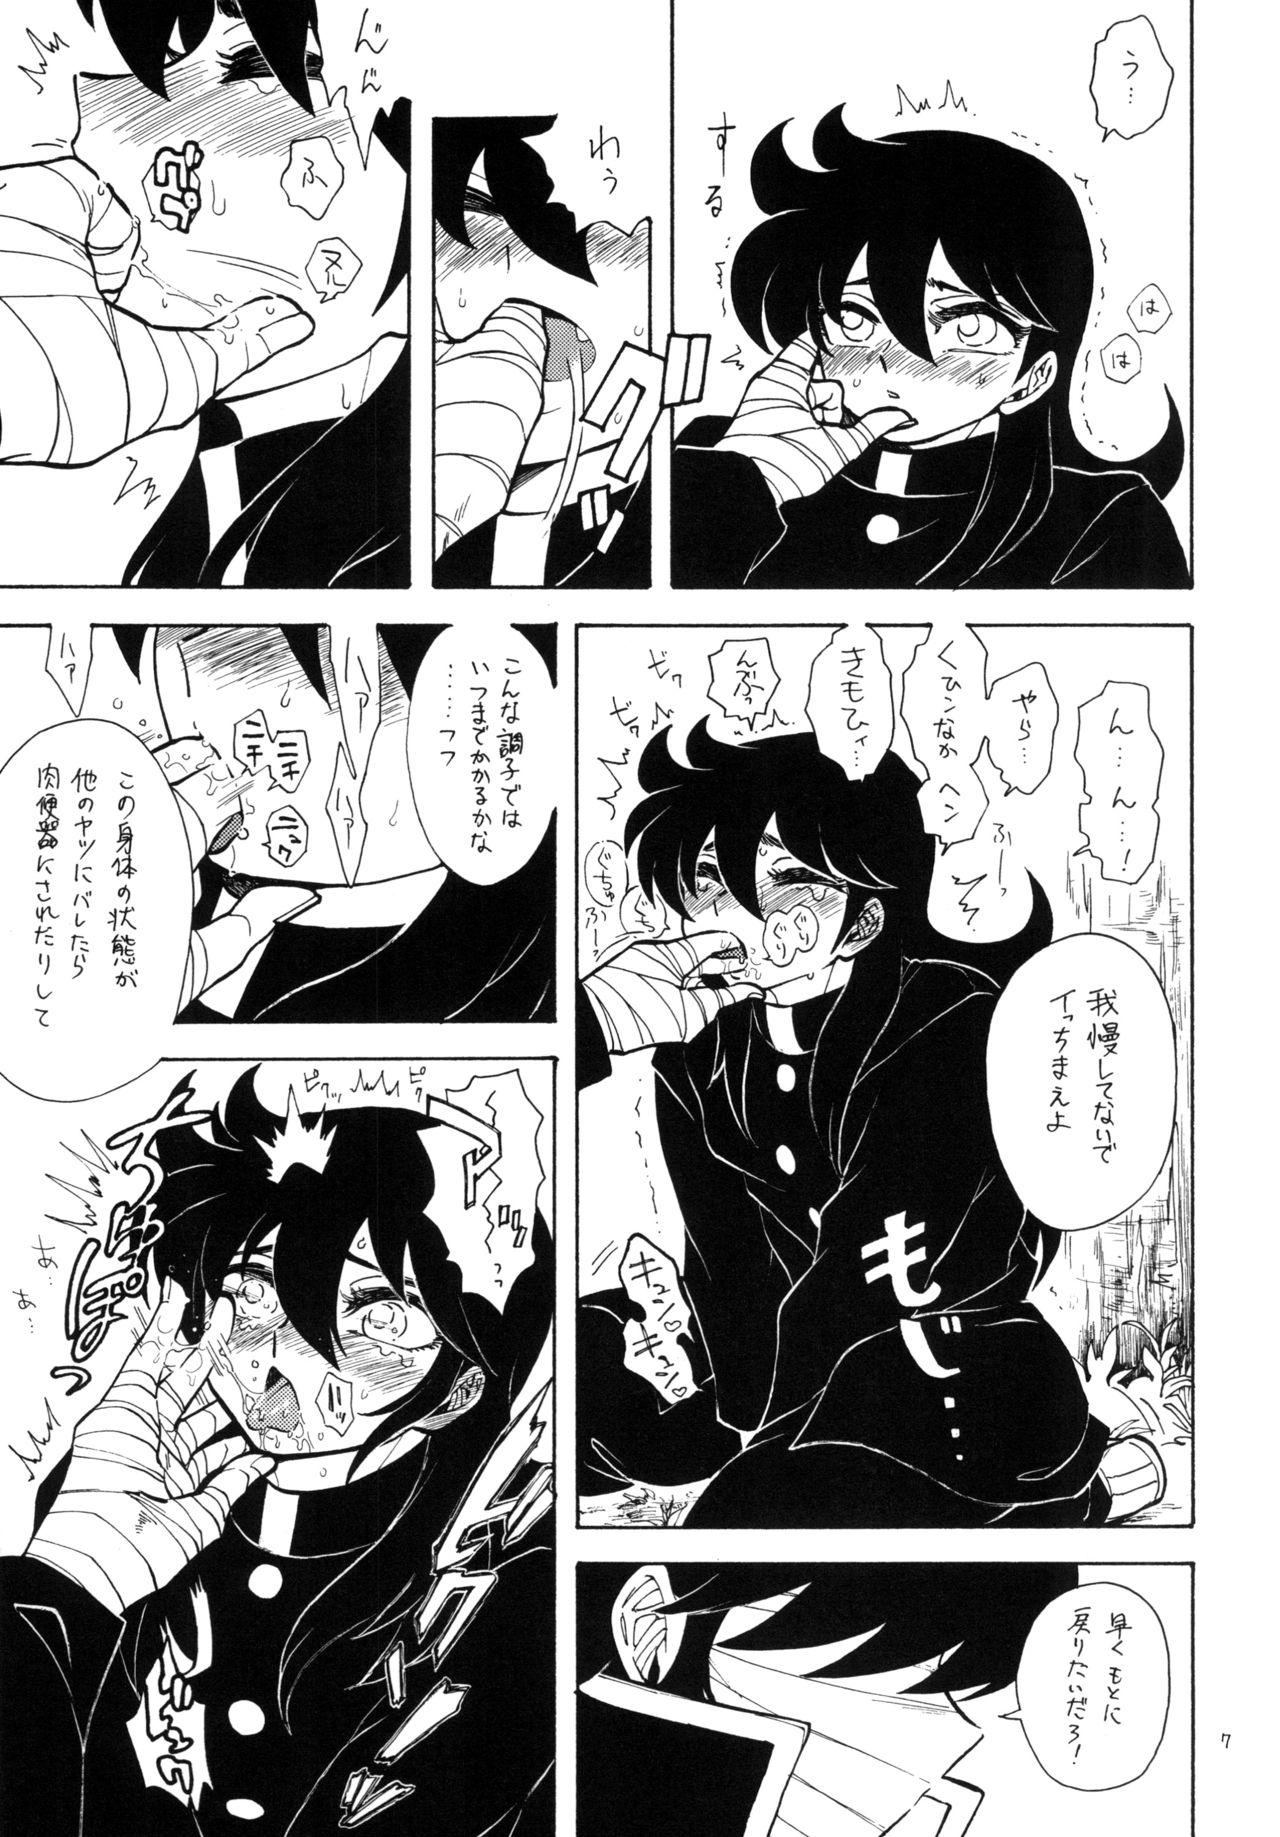 For 洗脳少年 - Saint seiya | knights of the zodiac Outdoors - Page 7